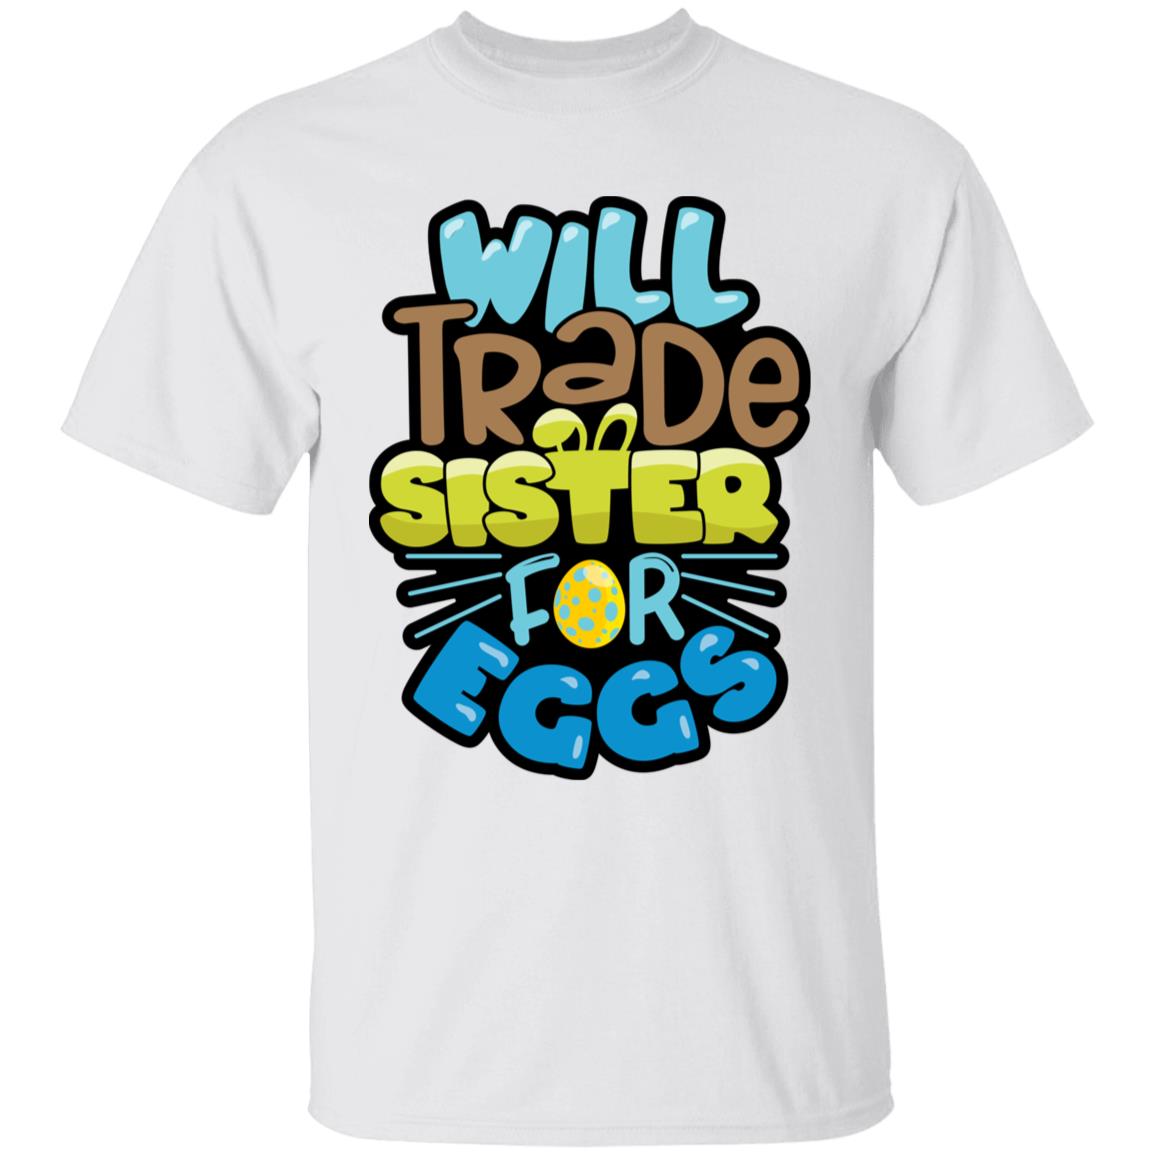 Will Trade Sister for Eggs Youth 5.3 oz 100% Cotton T-Shirt